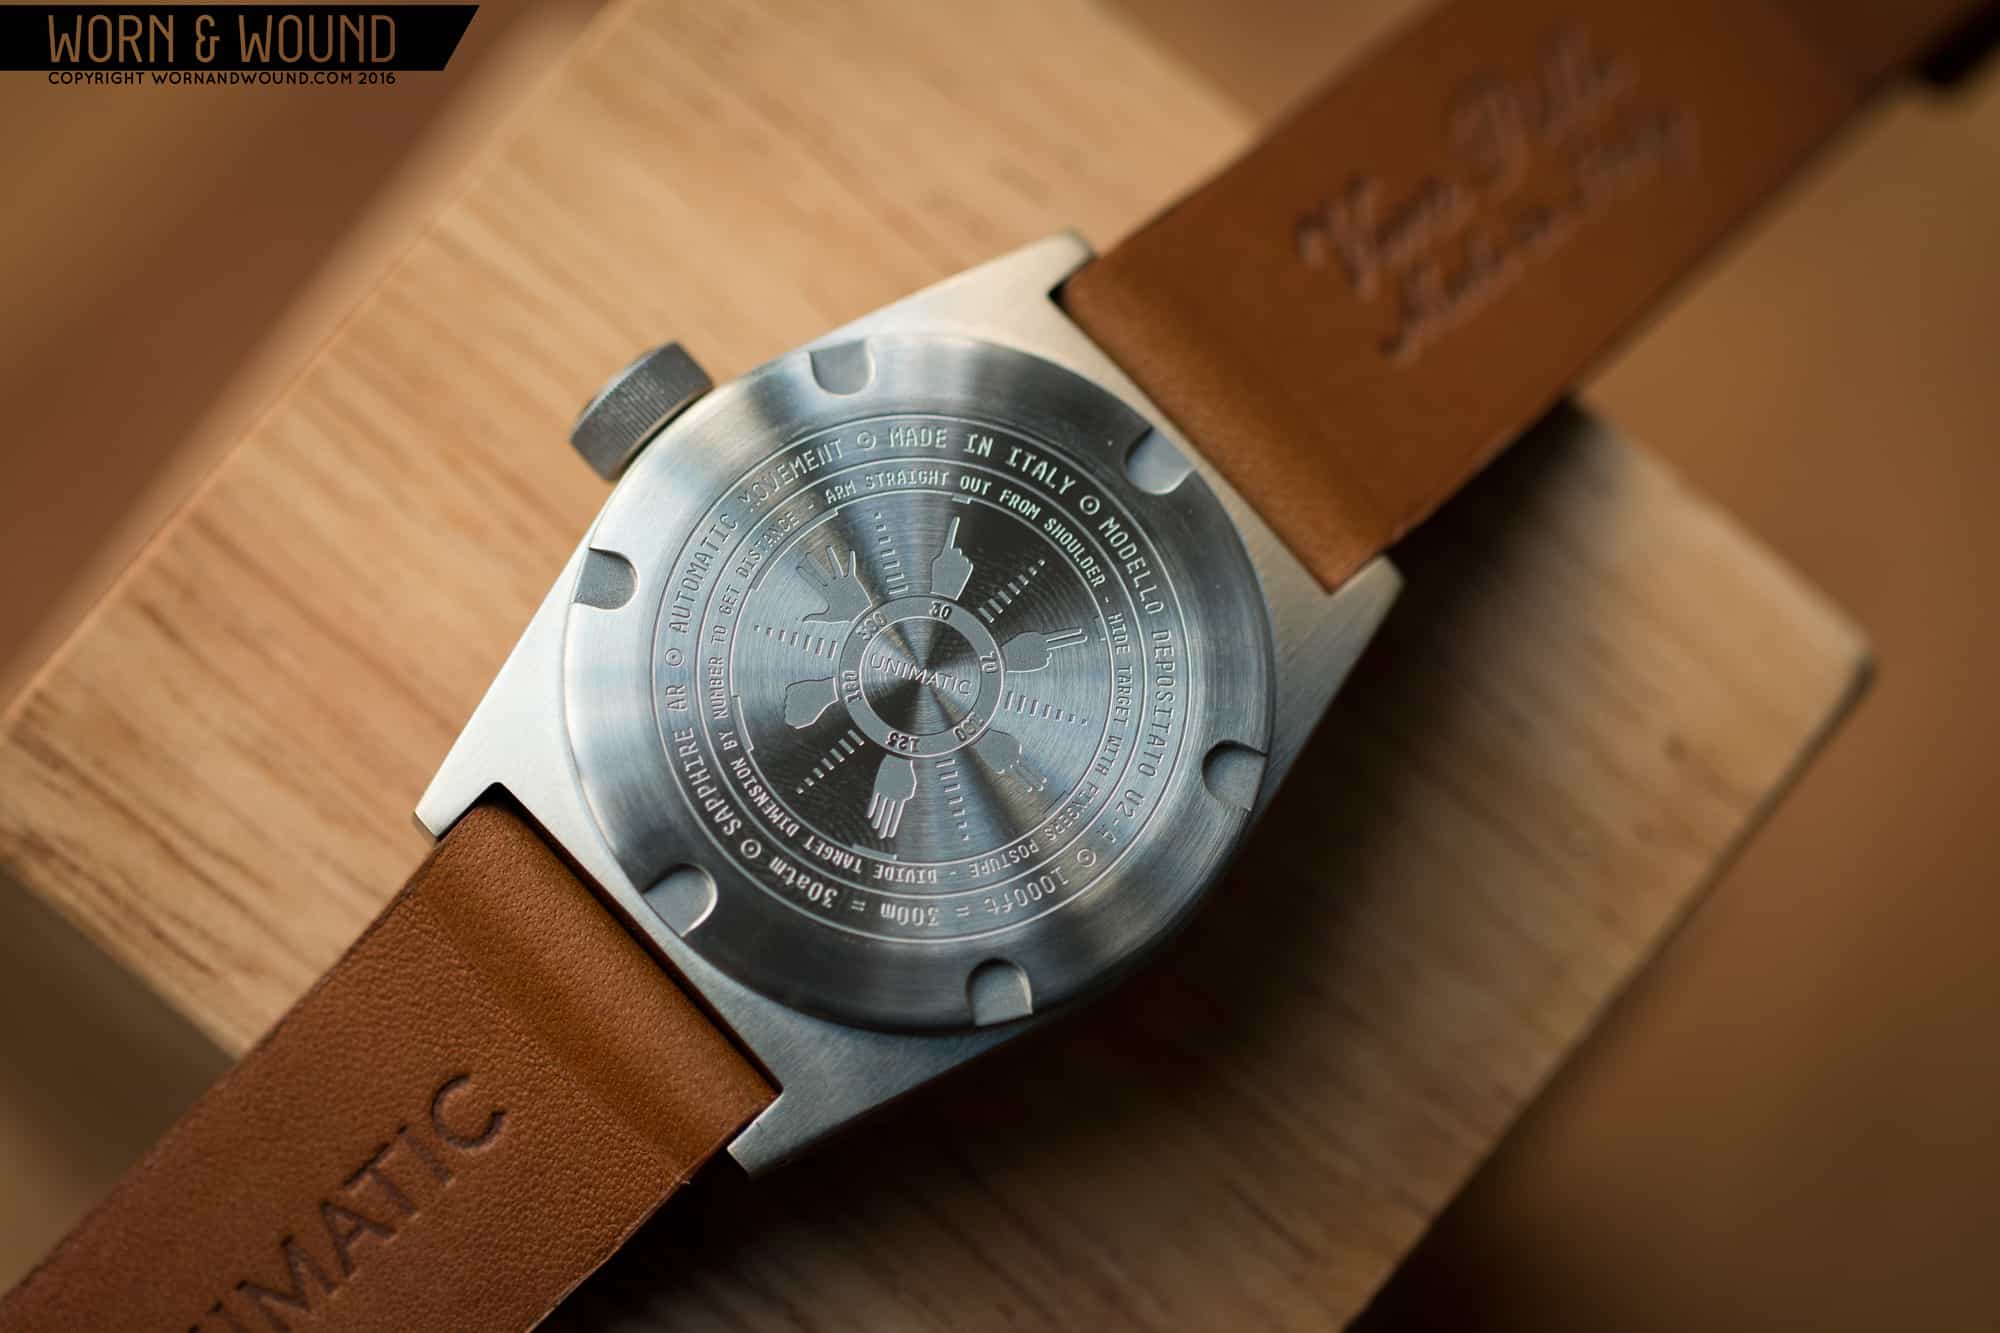 Hands-On with the Unimatic Modello Due U2-AG - Worn & Wound